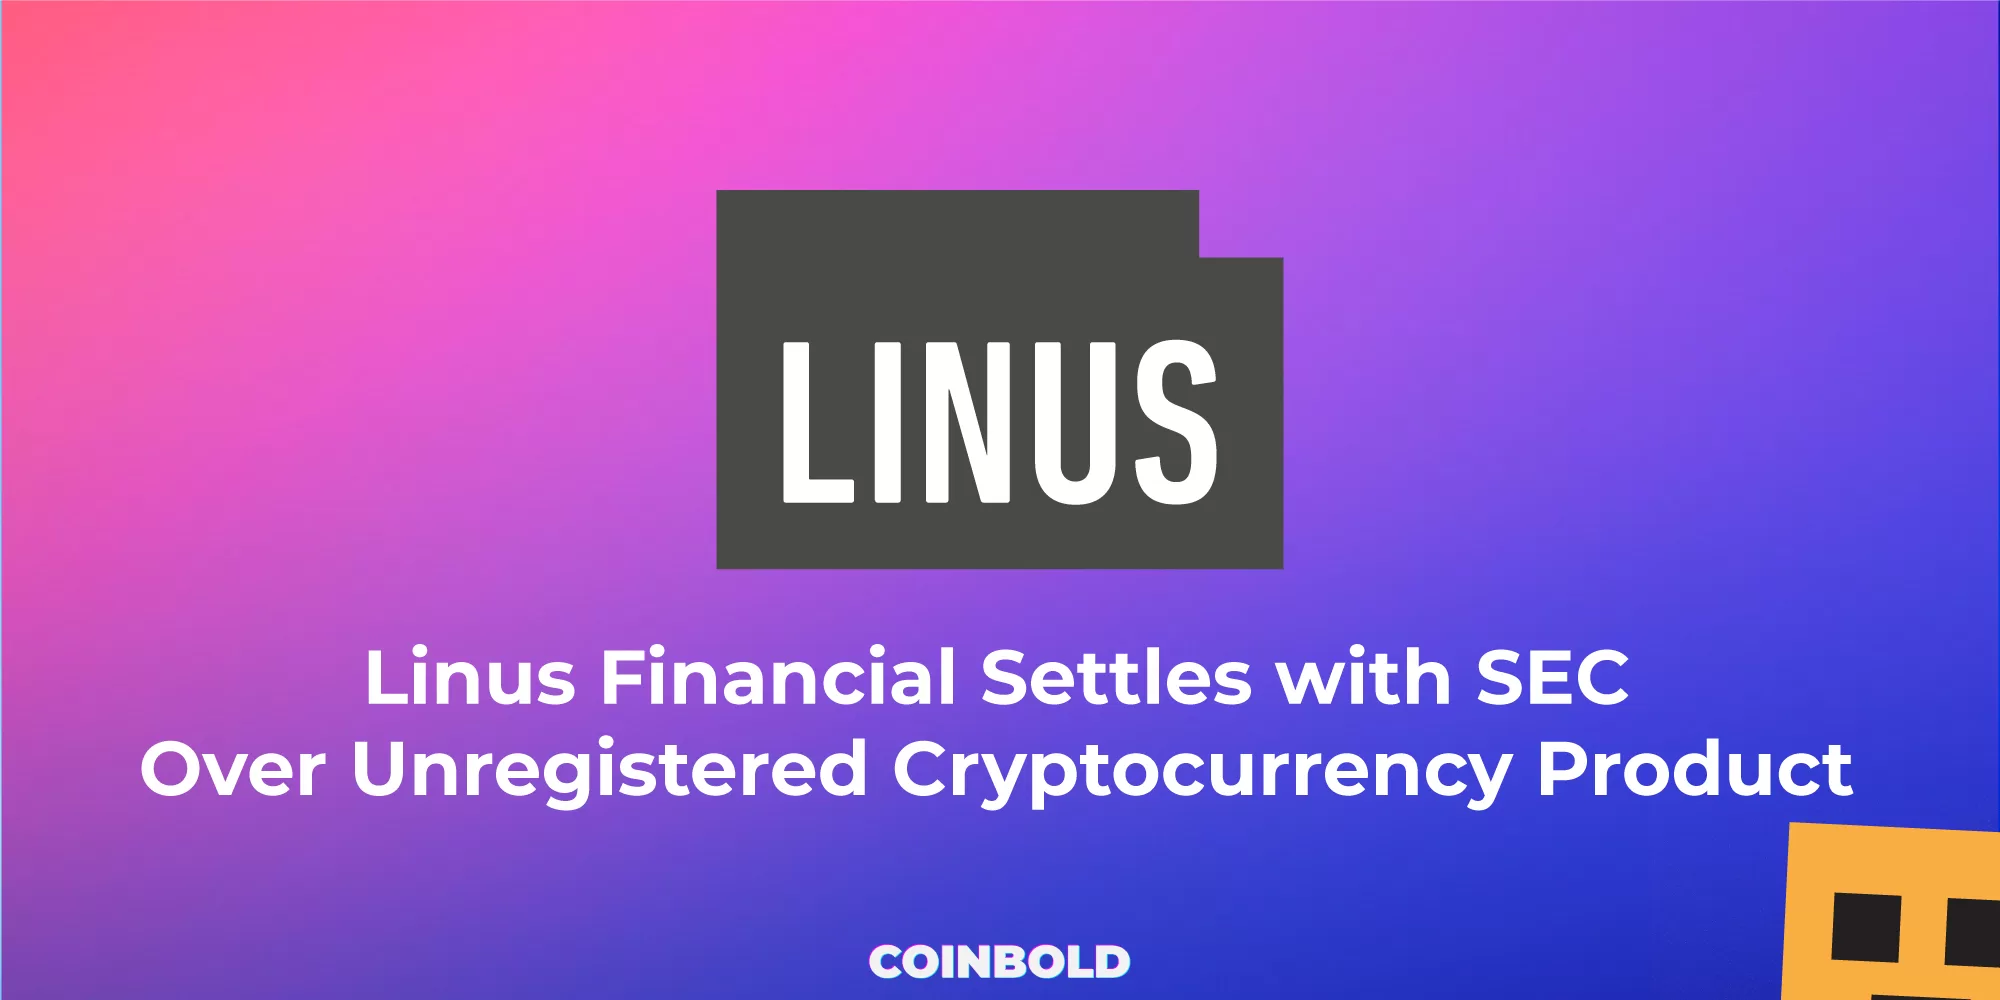 Linus Financial Settles with SEC Over Unregistered Cryptocurrency Product